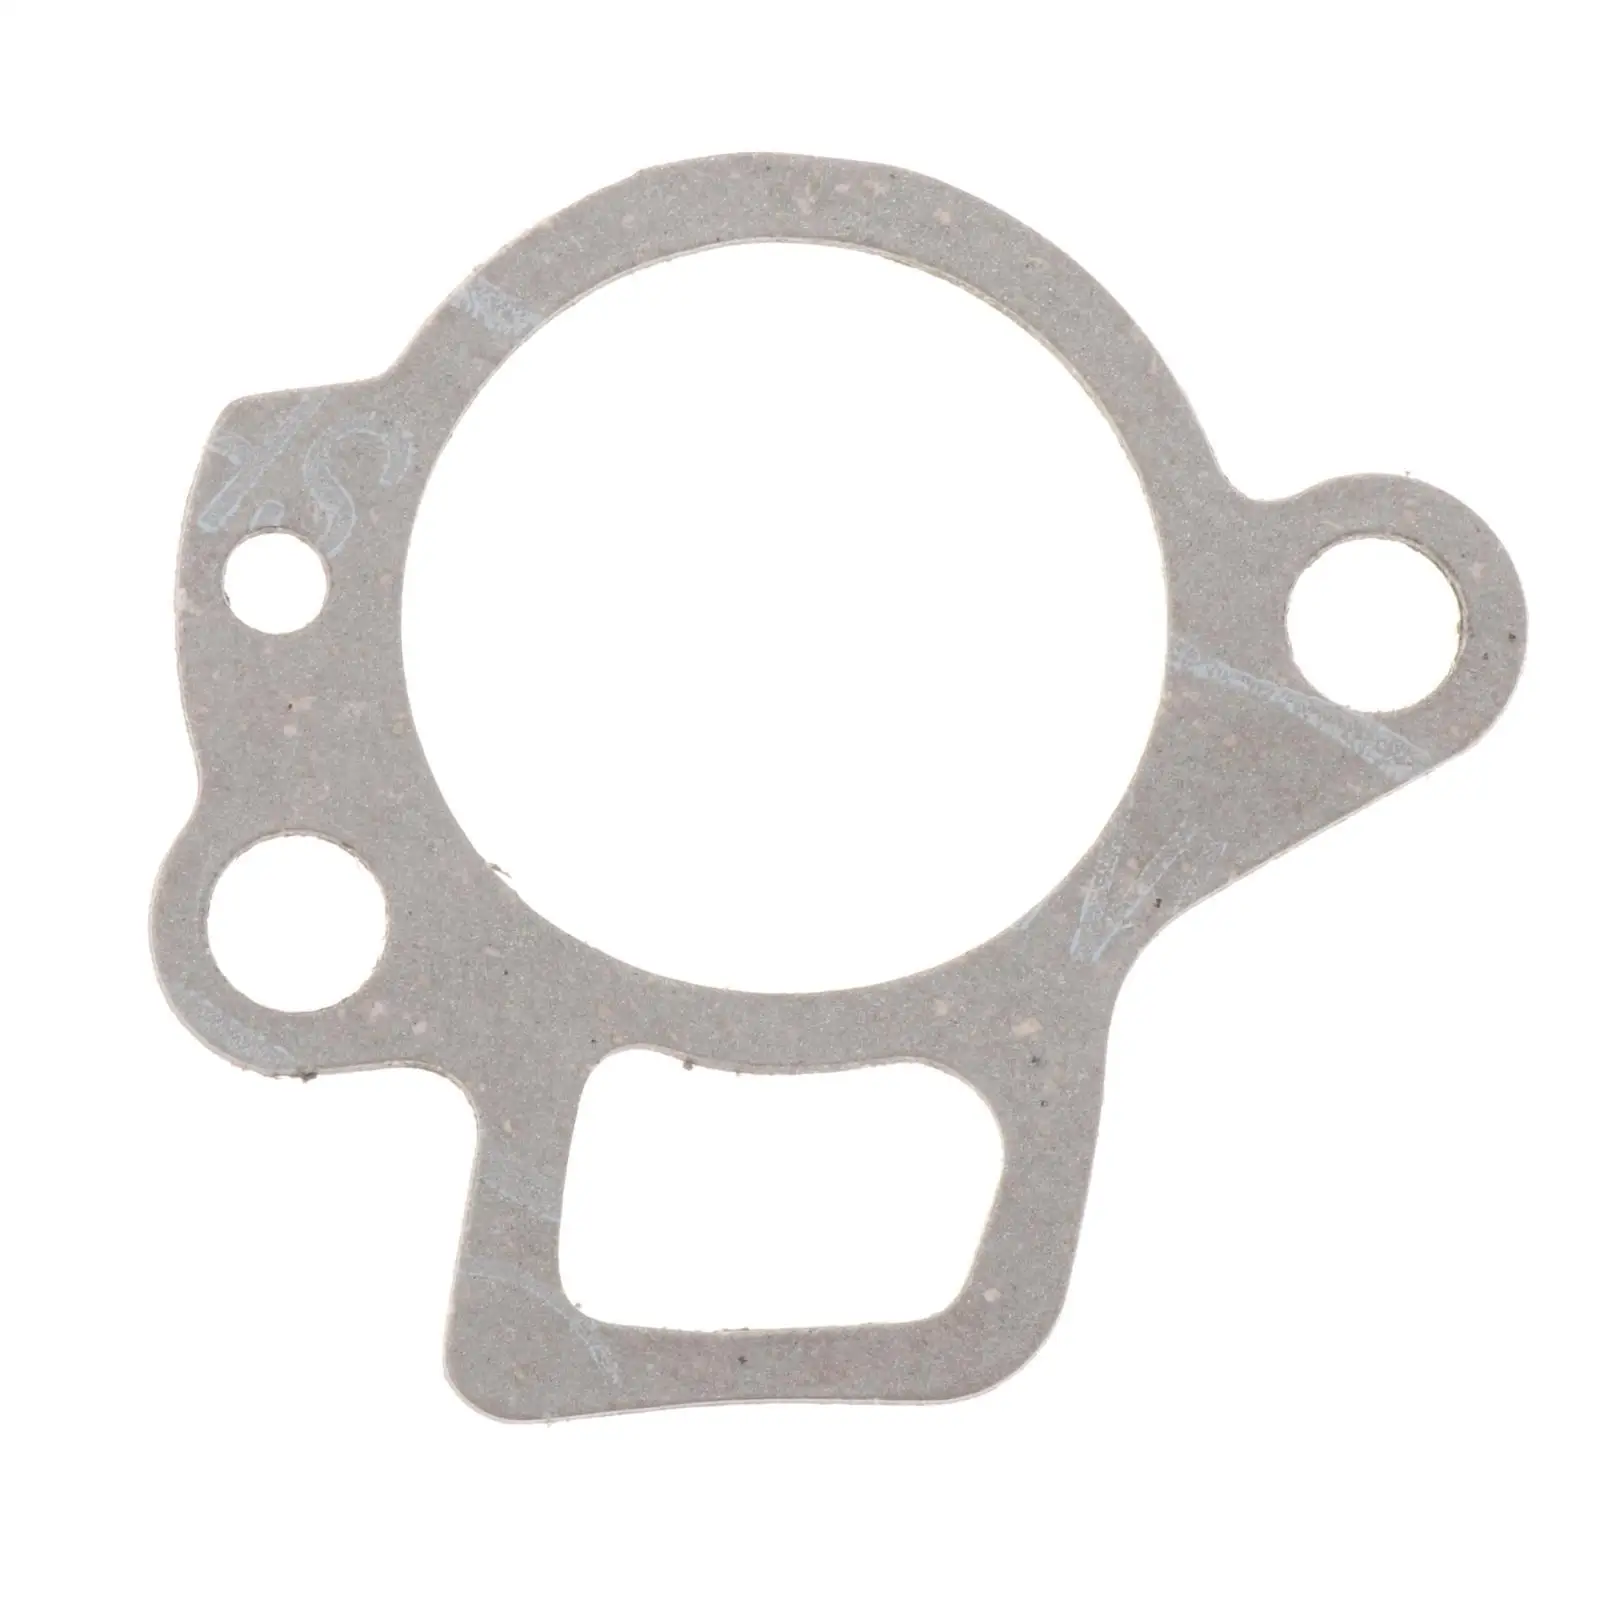 541-25 Thermostat Gasket 27-824853 Fits for Yamaha Outboard Engine 9.9-70 HP